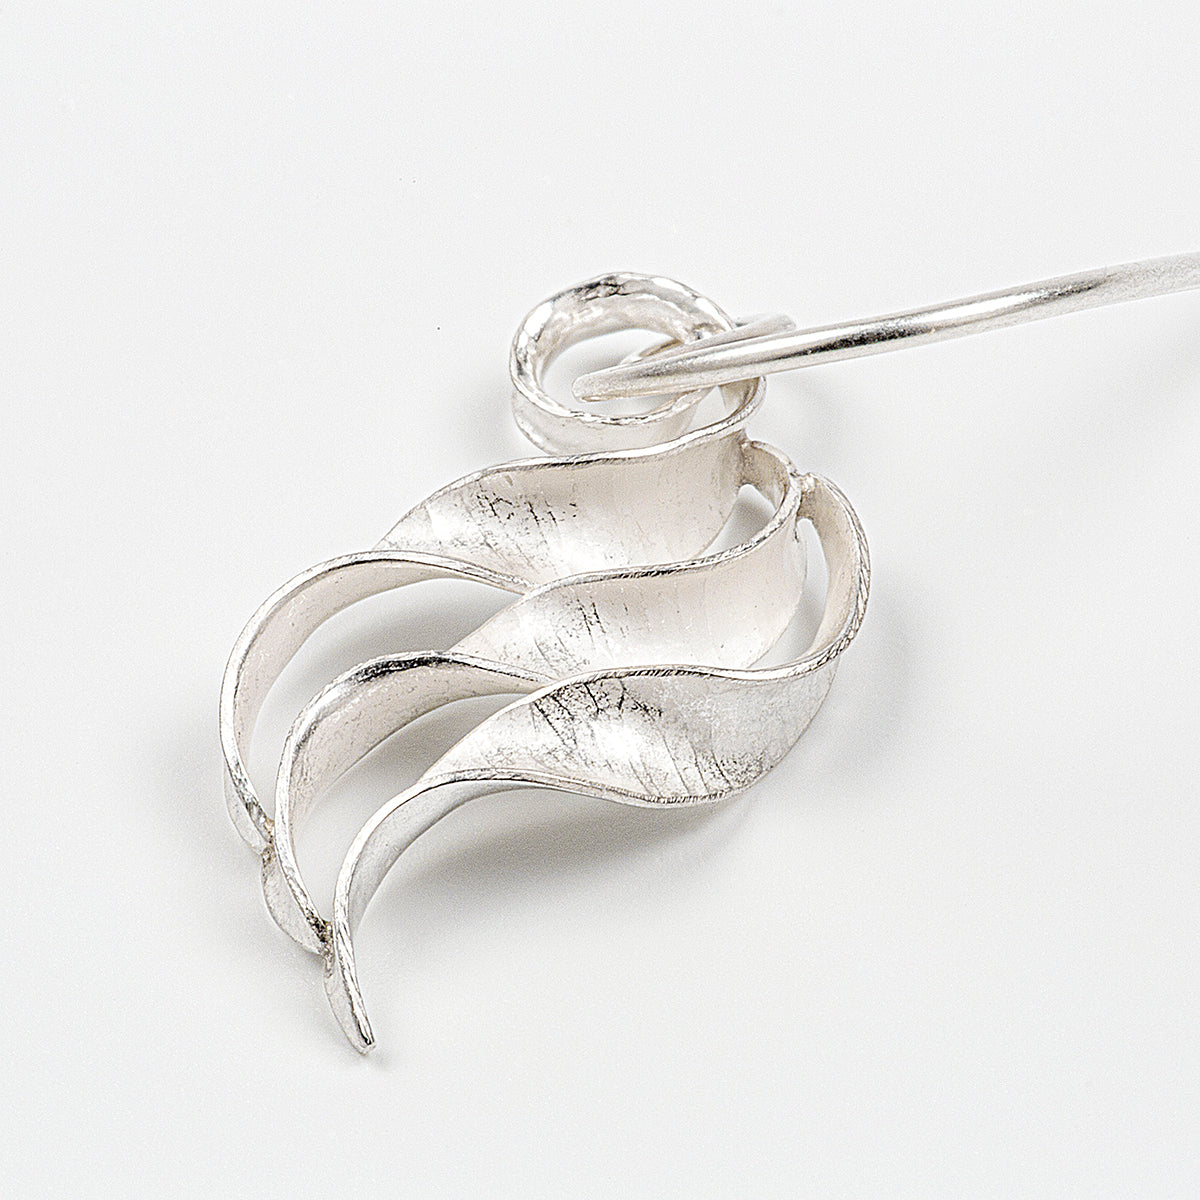 A pair of silver wing earrings made from recycled sterling silver by the process of anticlastic raising. These drop earrings have a hammered texture and non-reflective finish. Each consists of three s-shaped twisted units nested together. This image shows a single small earring.